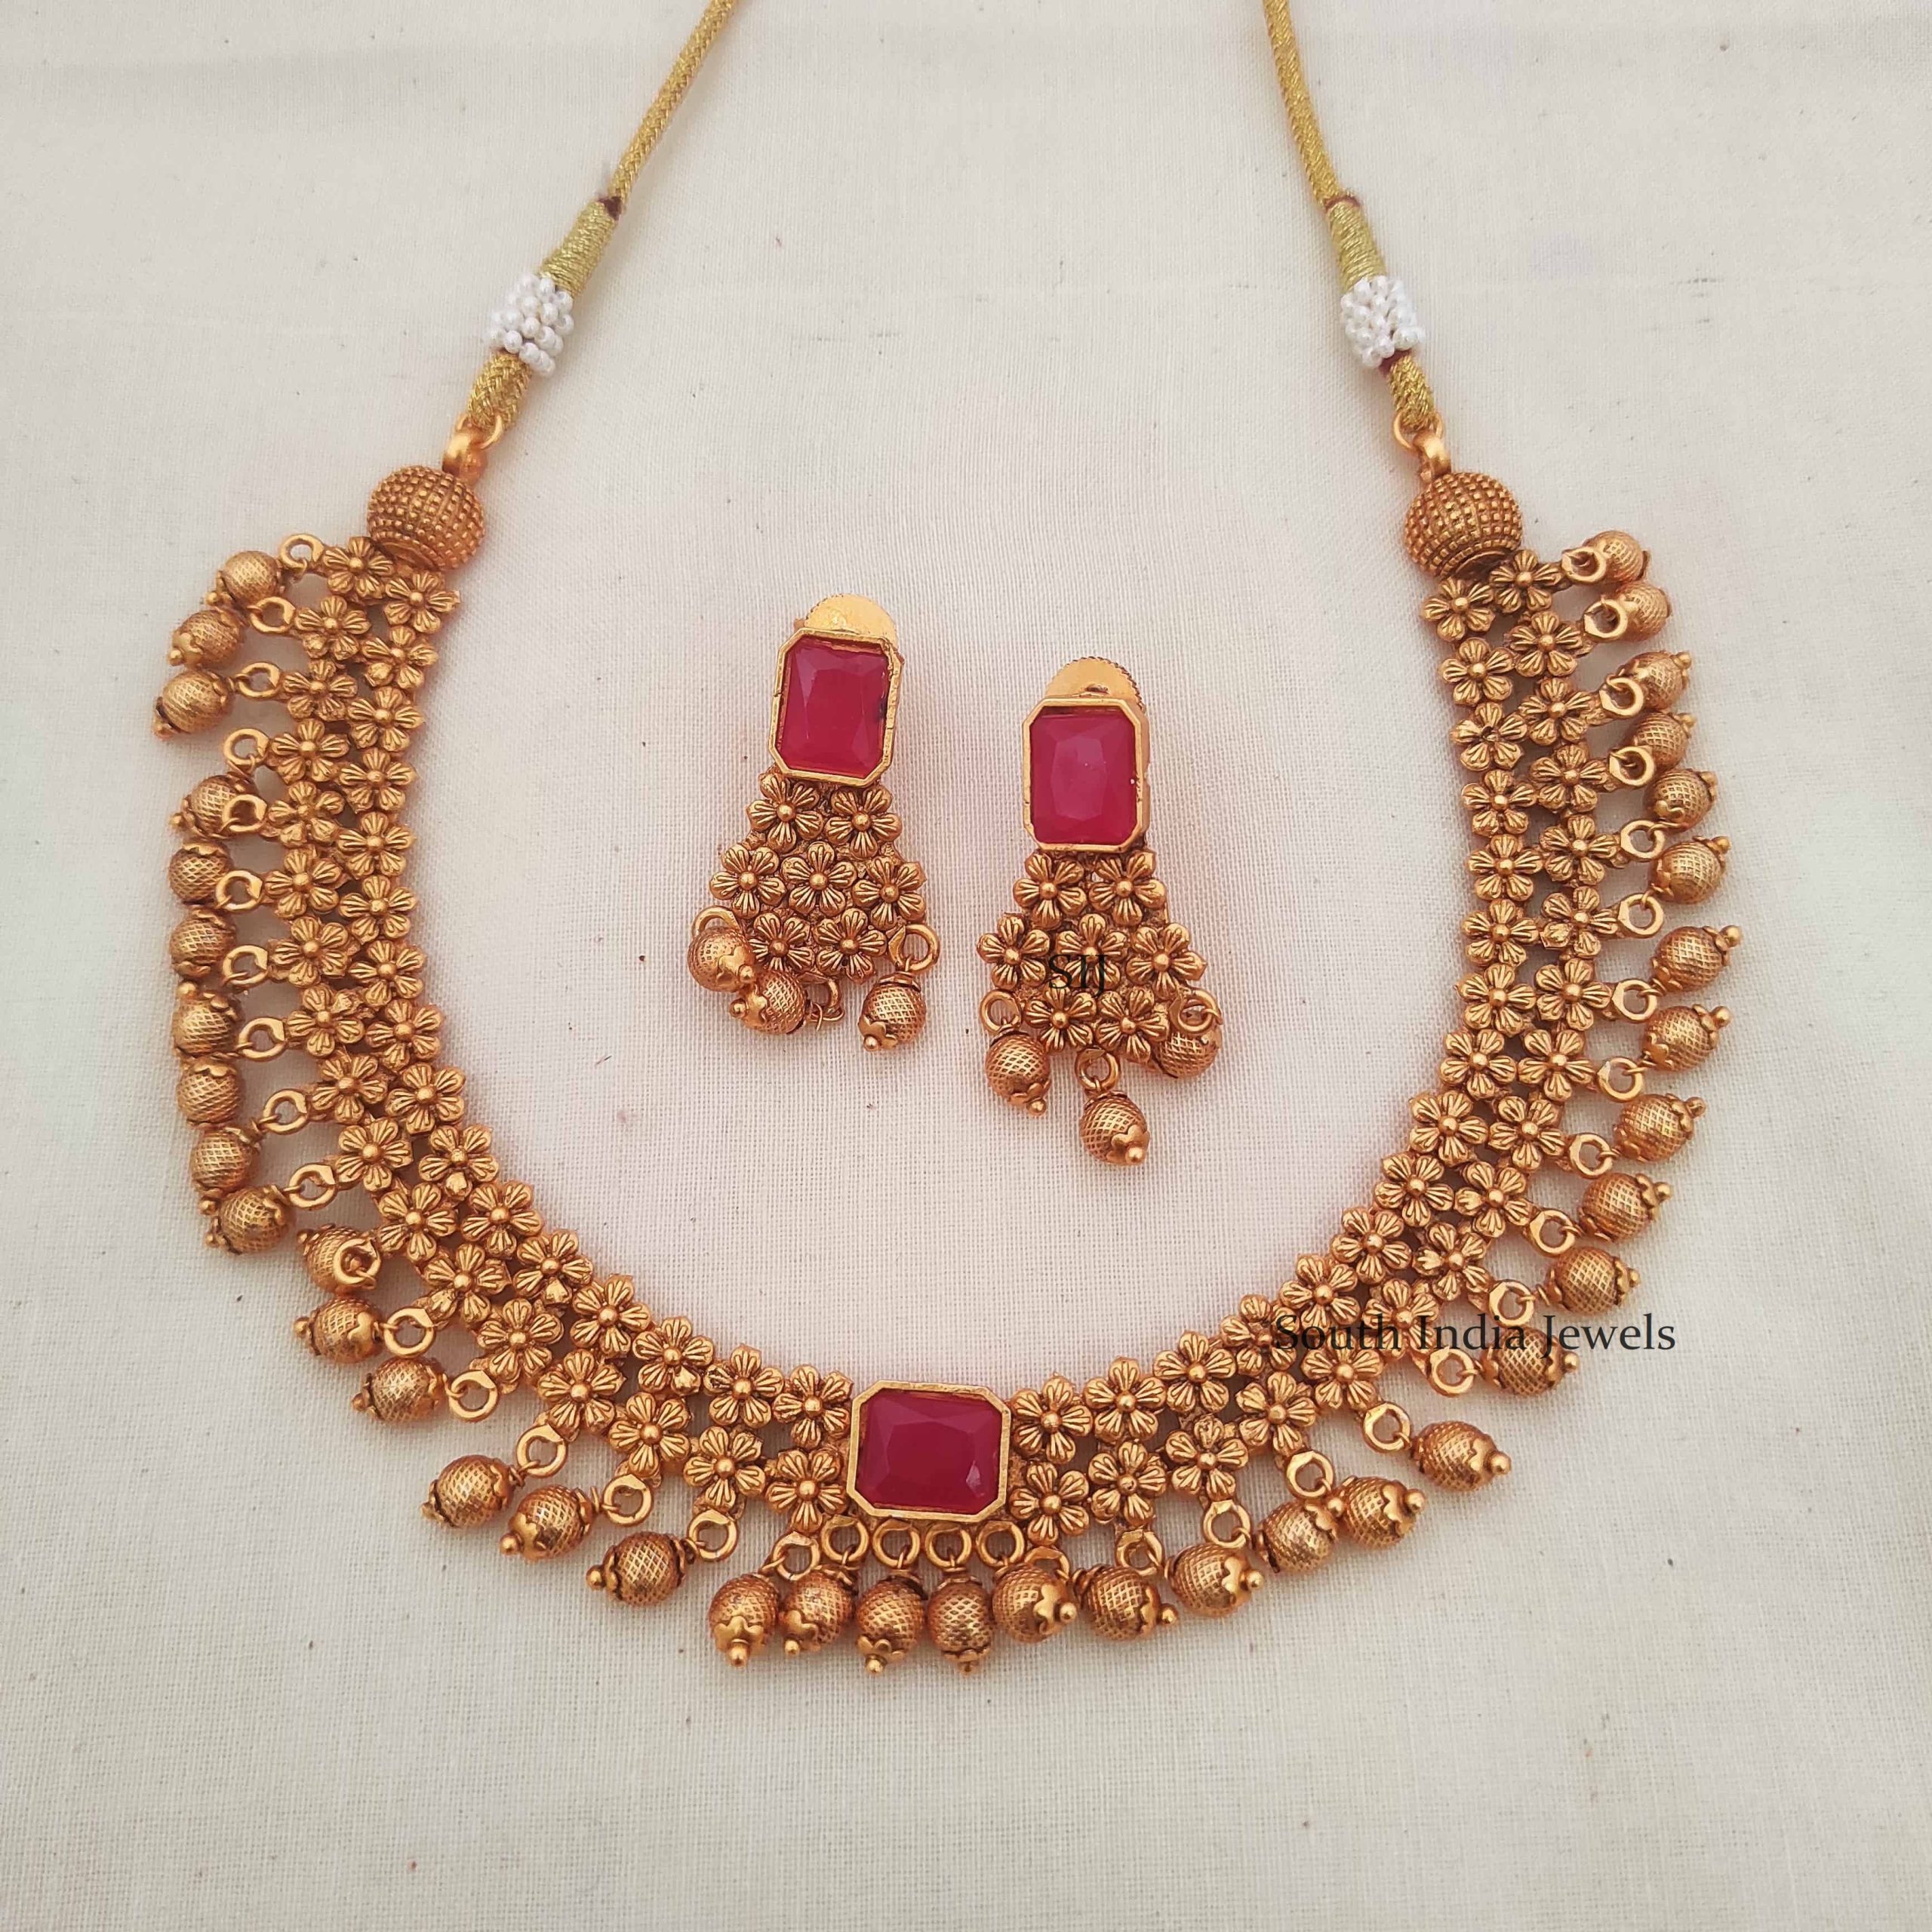 Marvelous Golden Beads Necklace